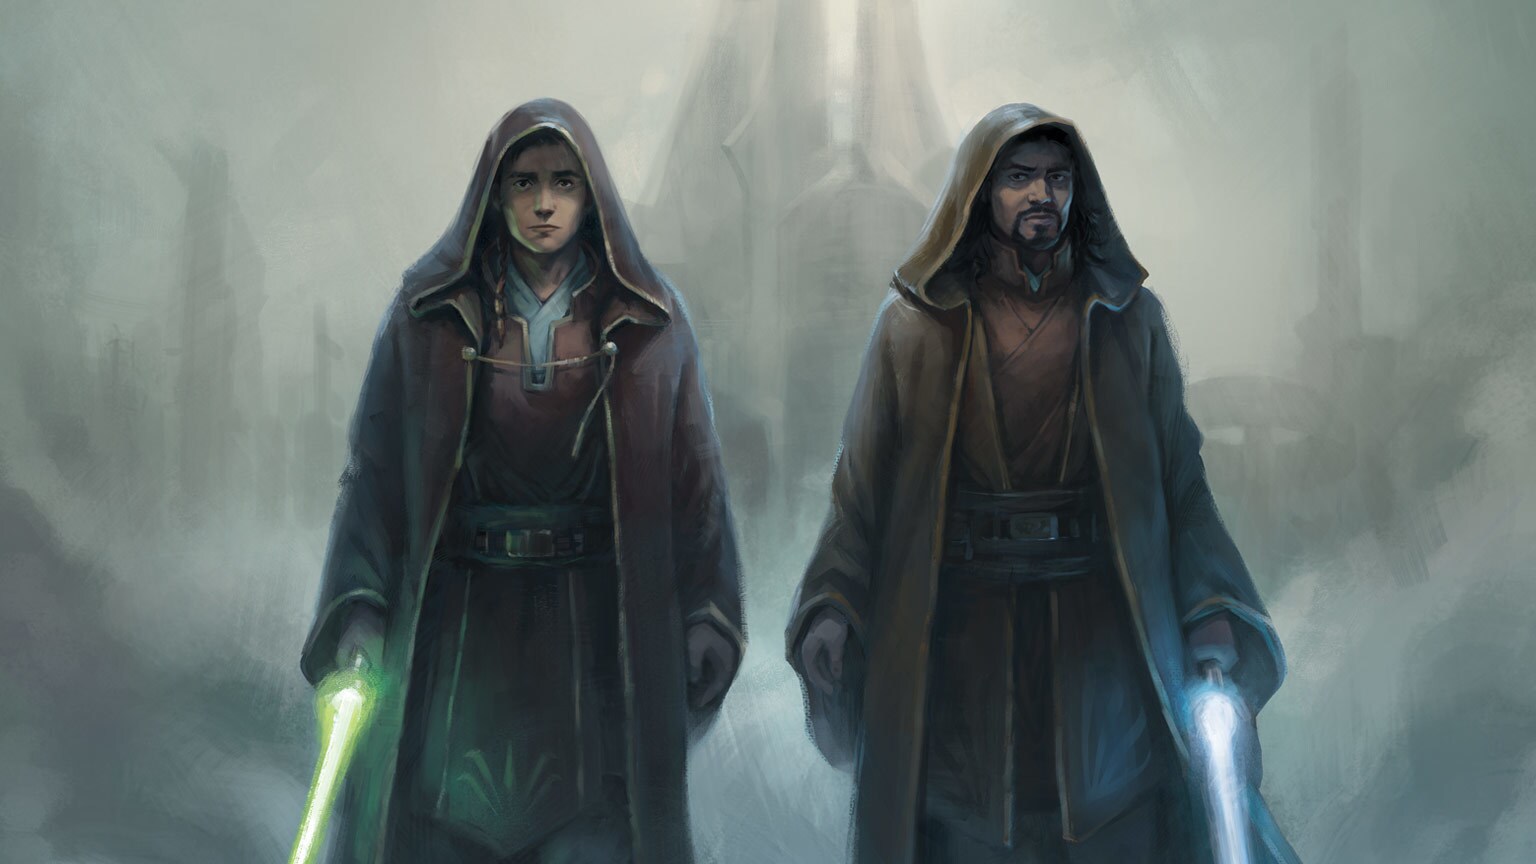 The Fallen Star and Other Book Covers Revealed on the Star Wars: The High Republic Show